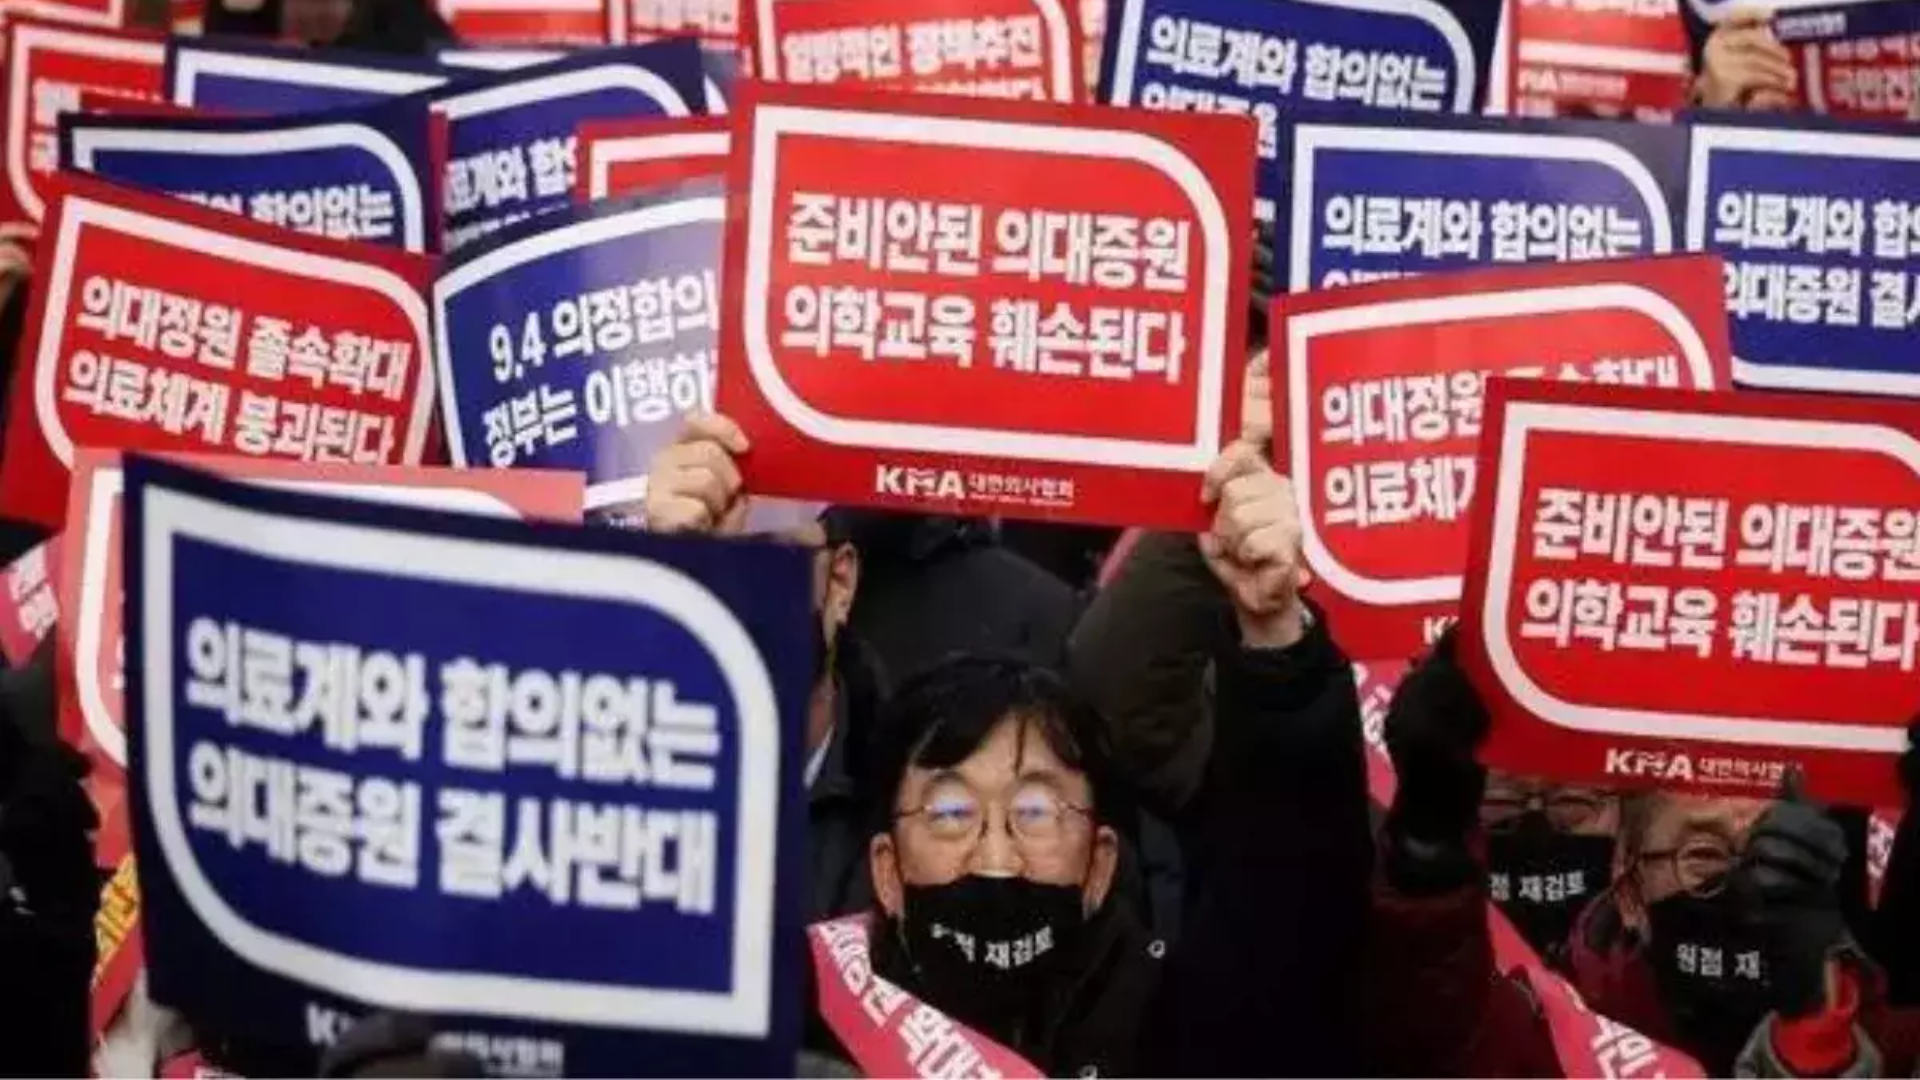 South Korea Health Ministry Sends Notices to Suspend Licenses of 5000 Trainee Doctors